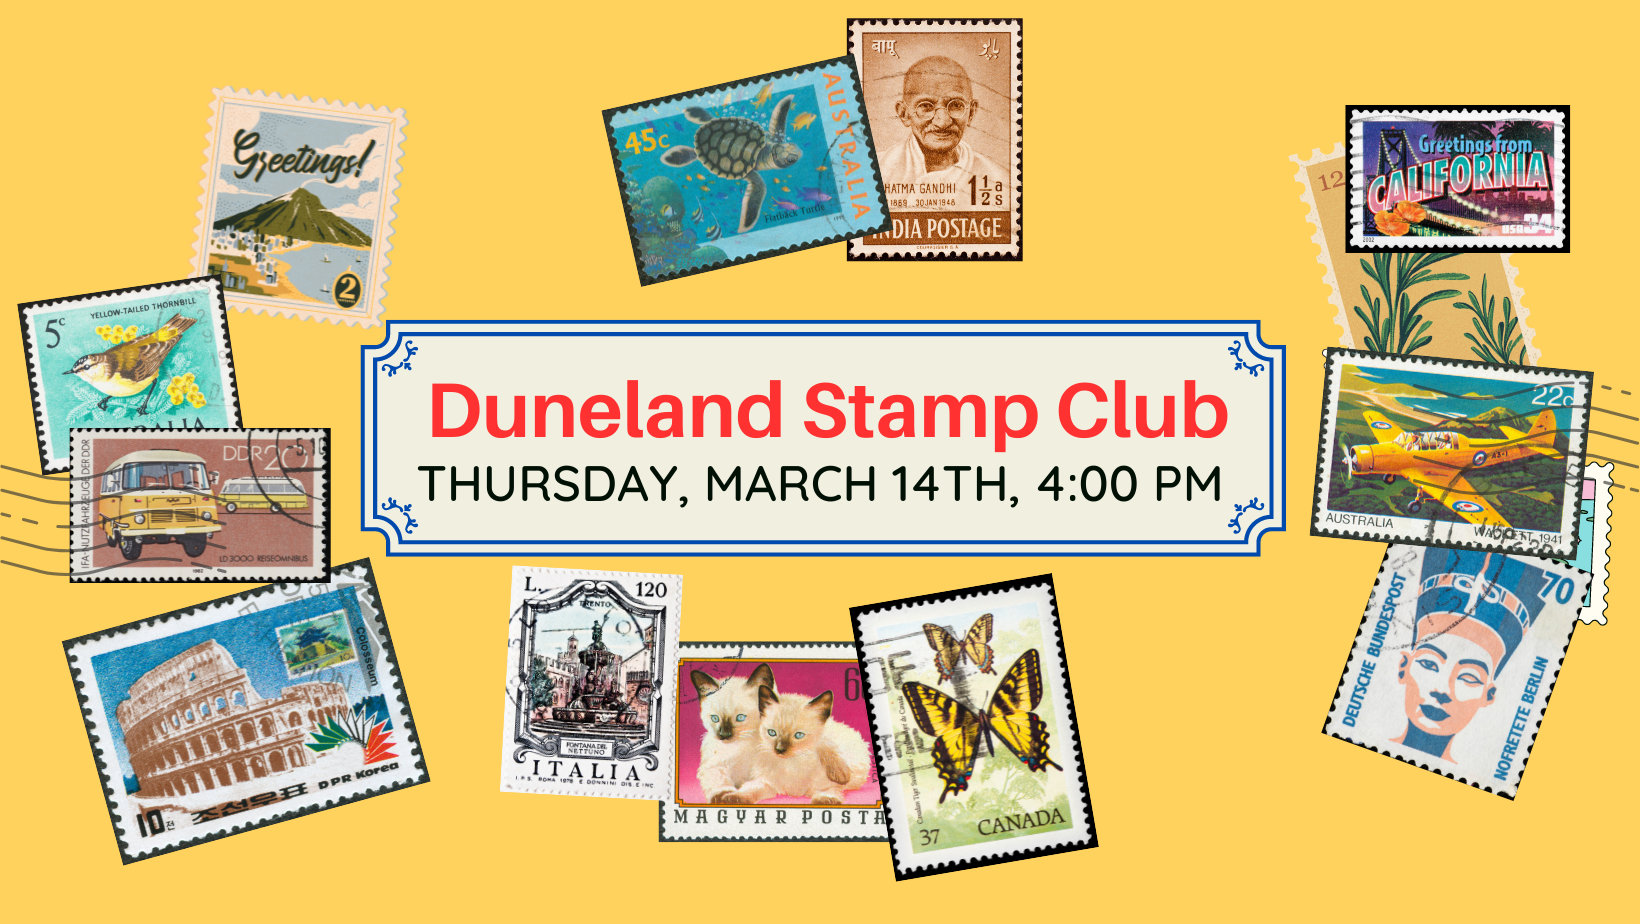 Duneland Stamp Club, Thursday, March 14 at 4:00 pm